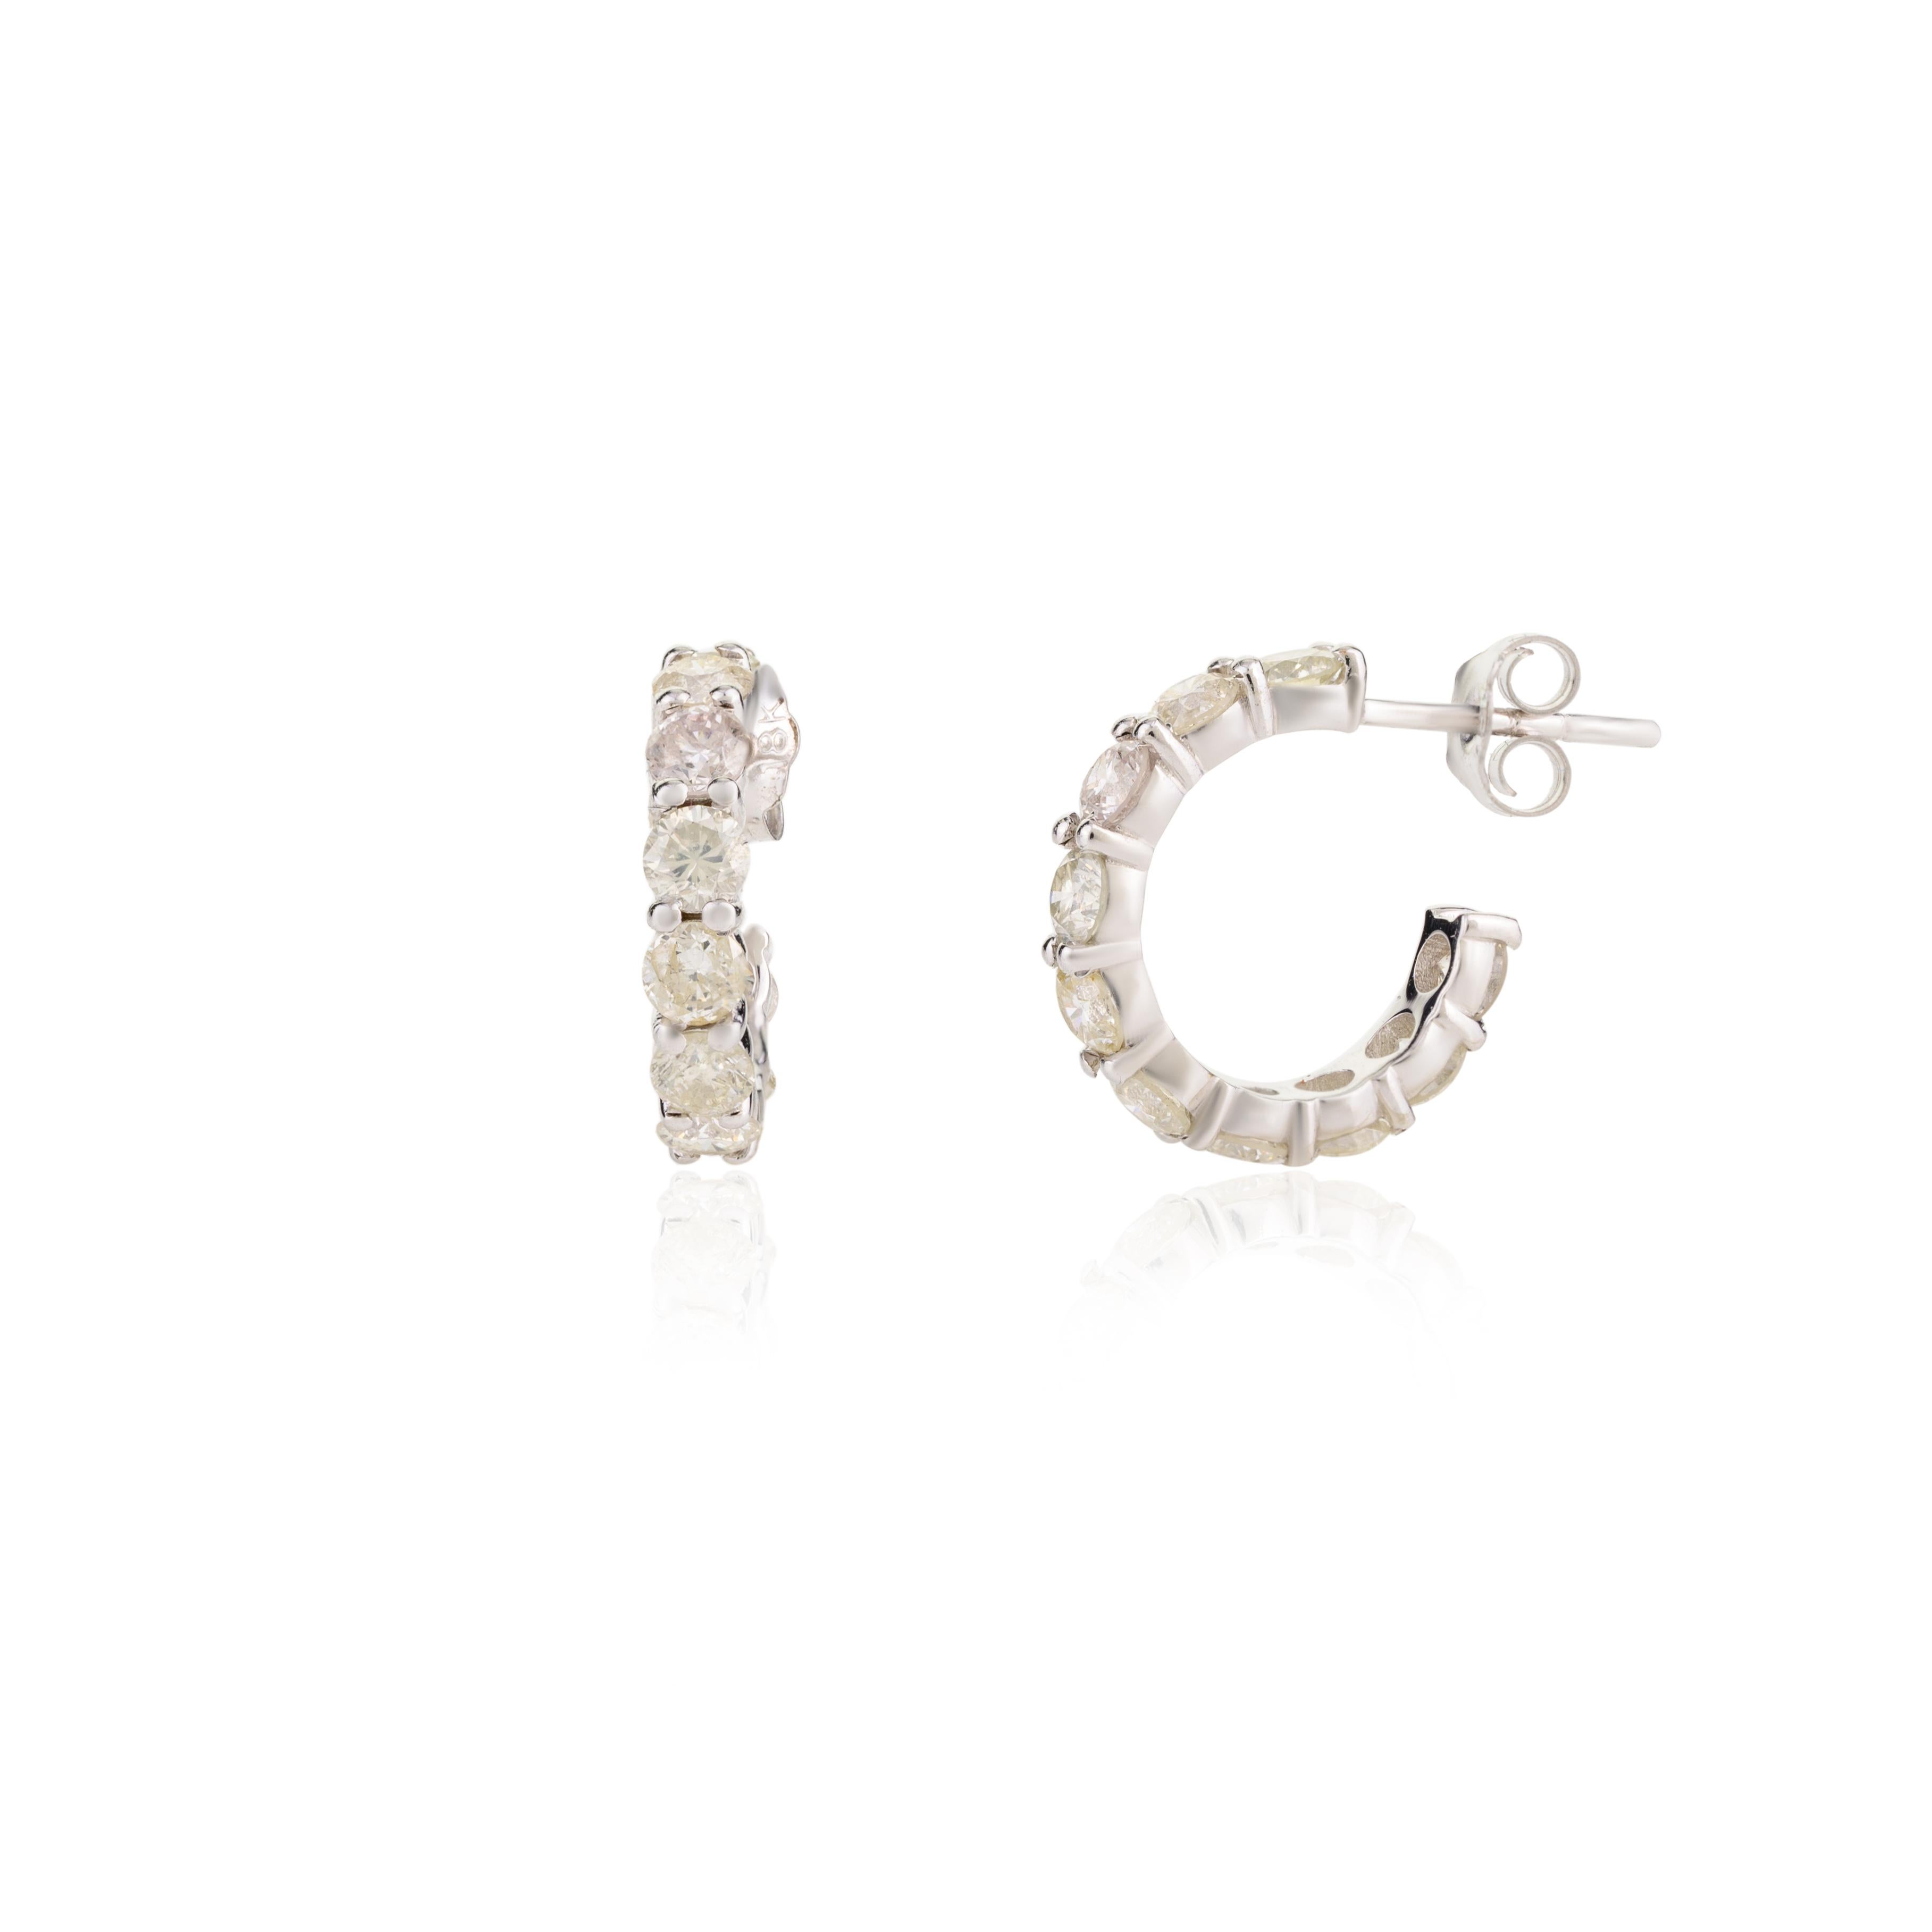 Tiny Natural Diamond Hoop Earrings Gift for Her in 18k Solid White Gold For Sale 2